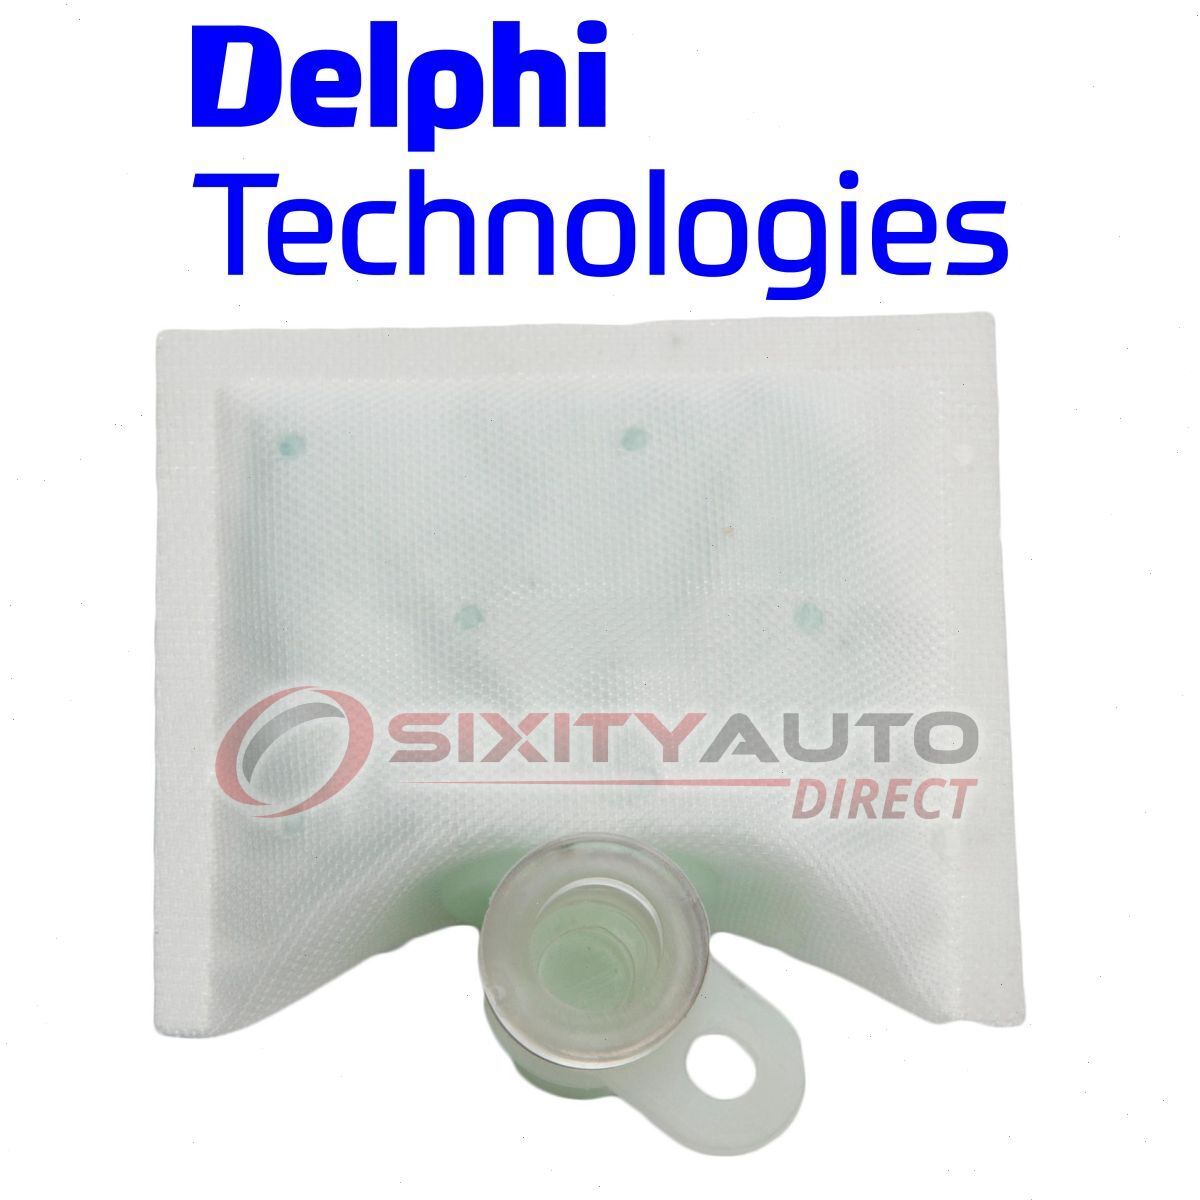 Delphi Fuel Pump Strainer for 1989 Geo Spectrum Air Delivery Filters  wy